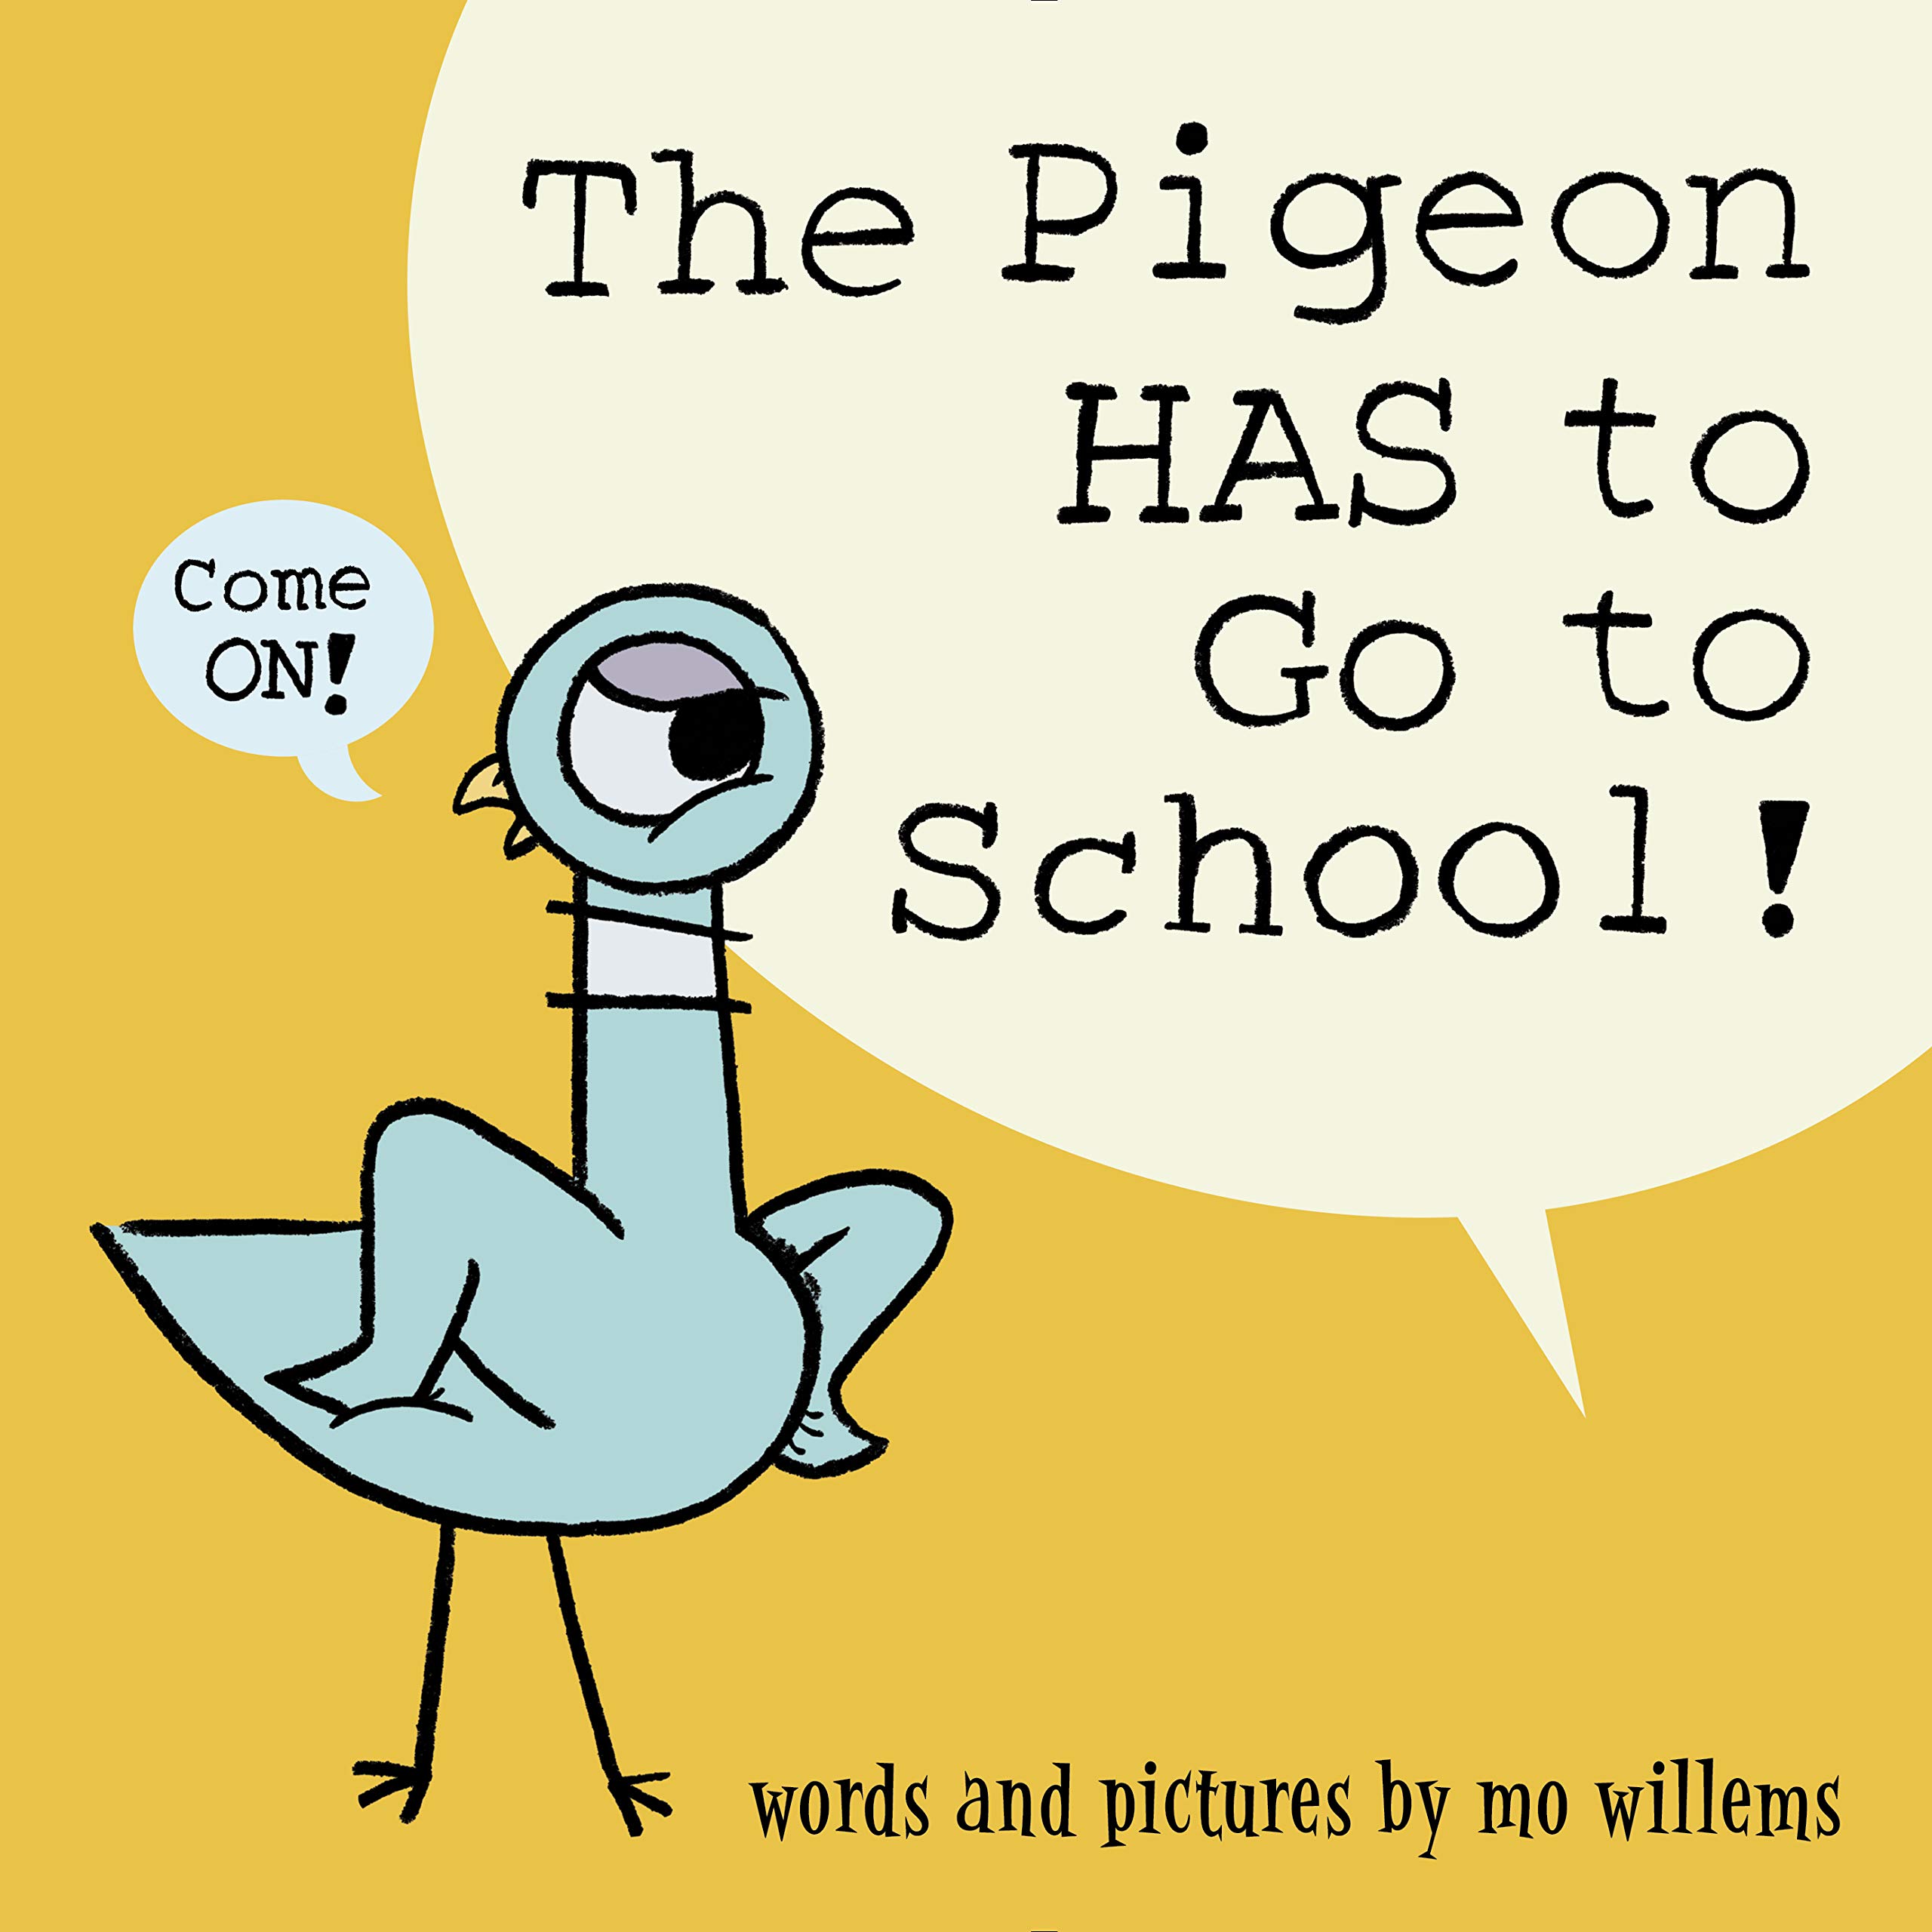 photo of the book "the pigeon has to go to school"